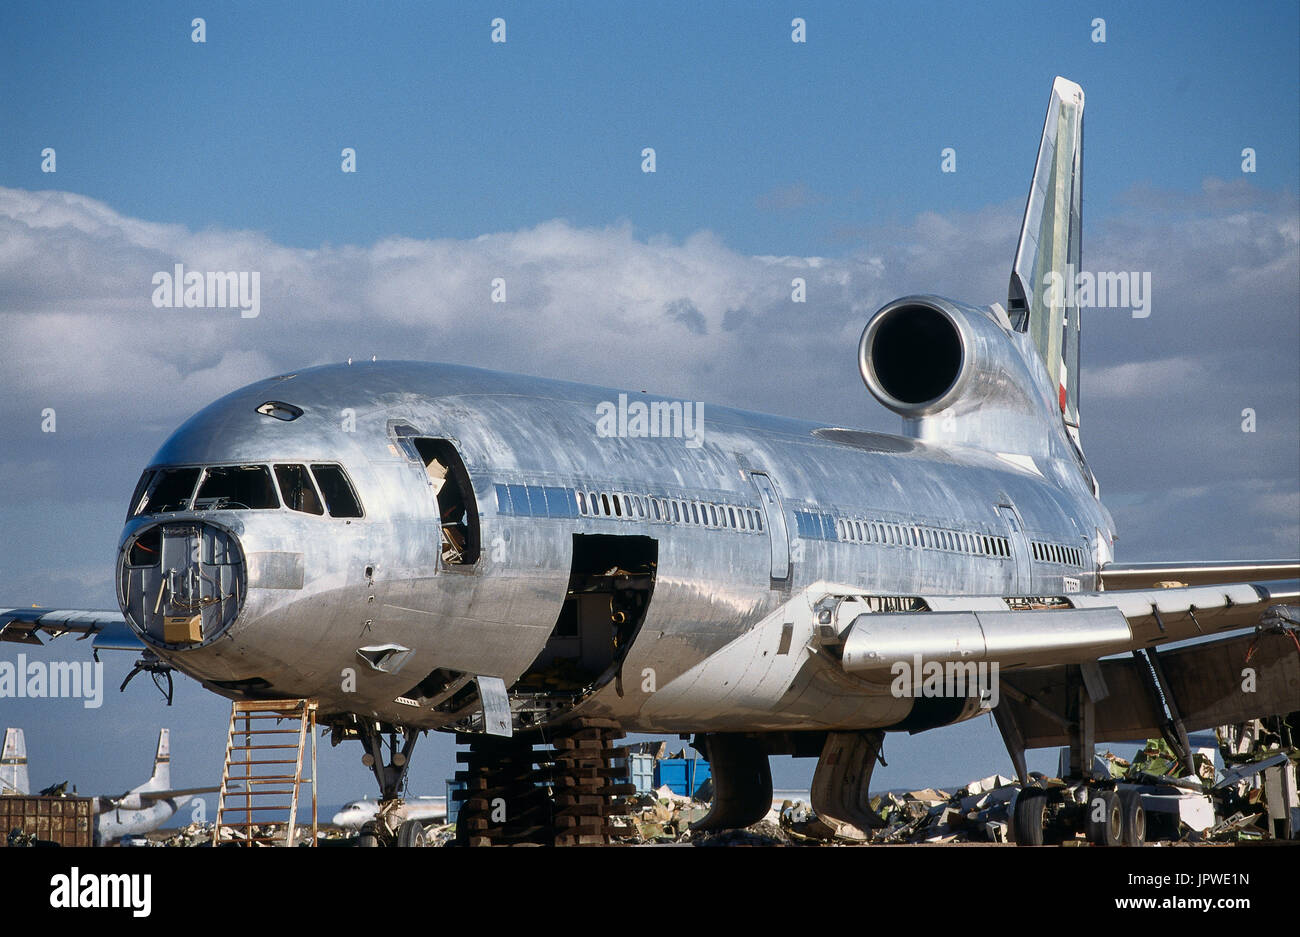 ex Delta Air Lines Lockheed L-1011 Tristar in bare metal finish being parted-out in the desert with Eastern Airlines titles visible on the fuselage an Stock Photo